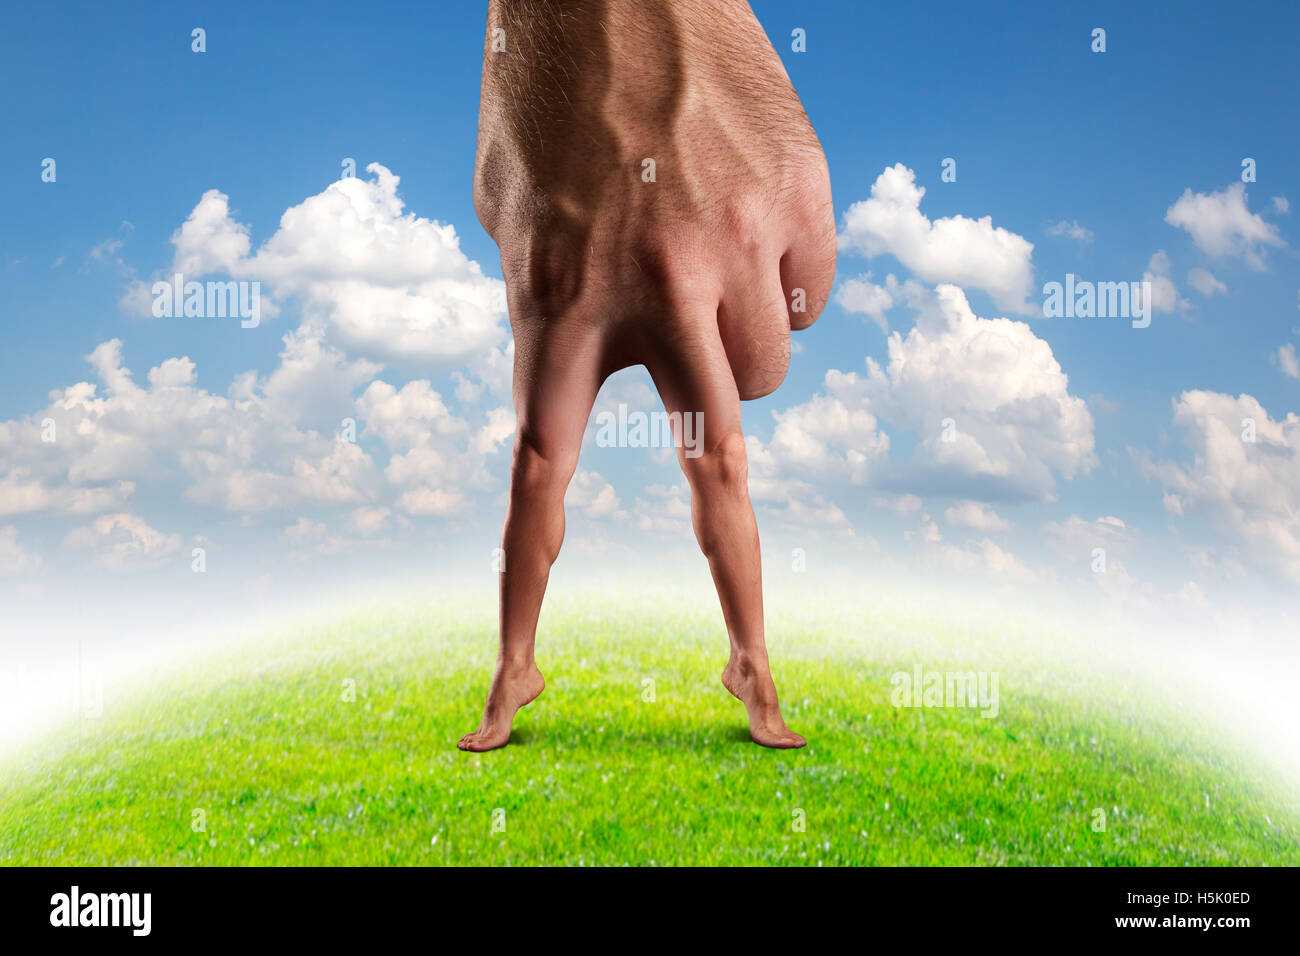 Male hand with legs Stock Photo